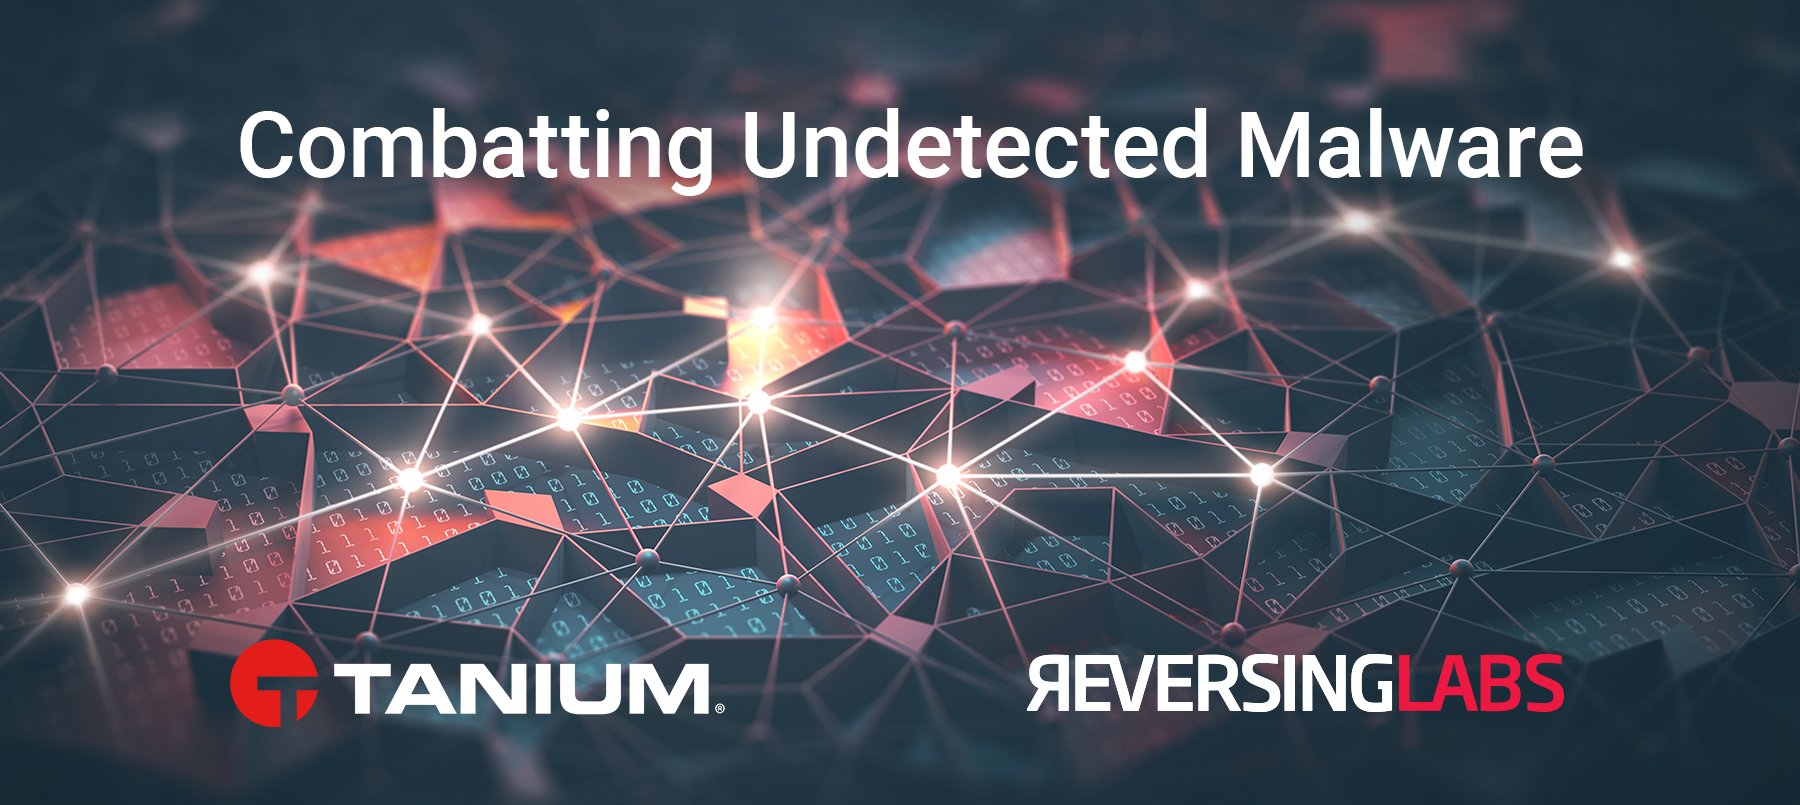 Combatting Undetected Malware with Tanium and ReversingLabs